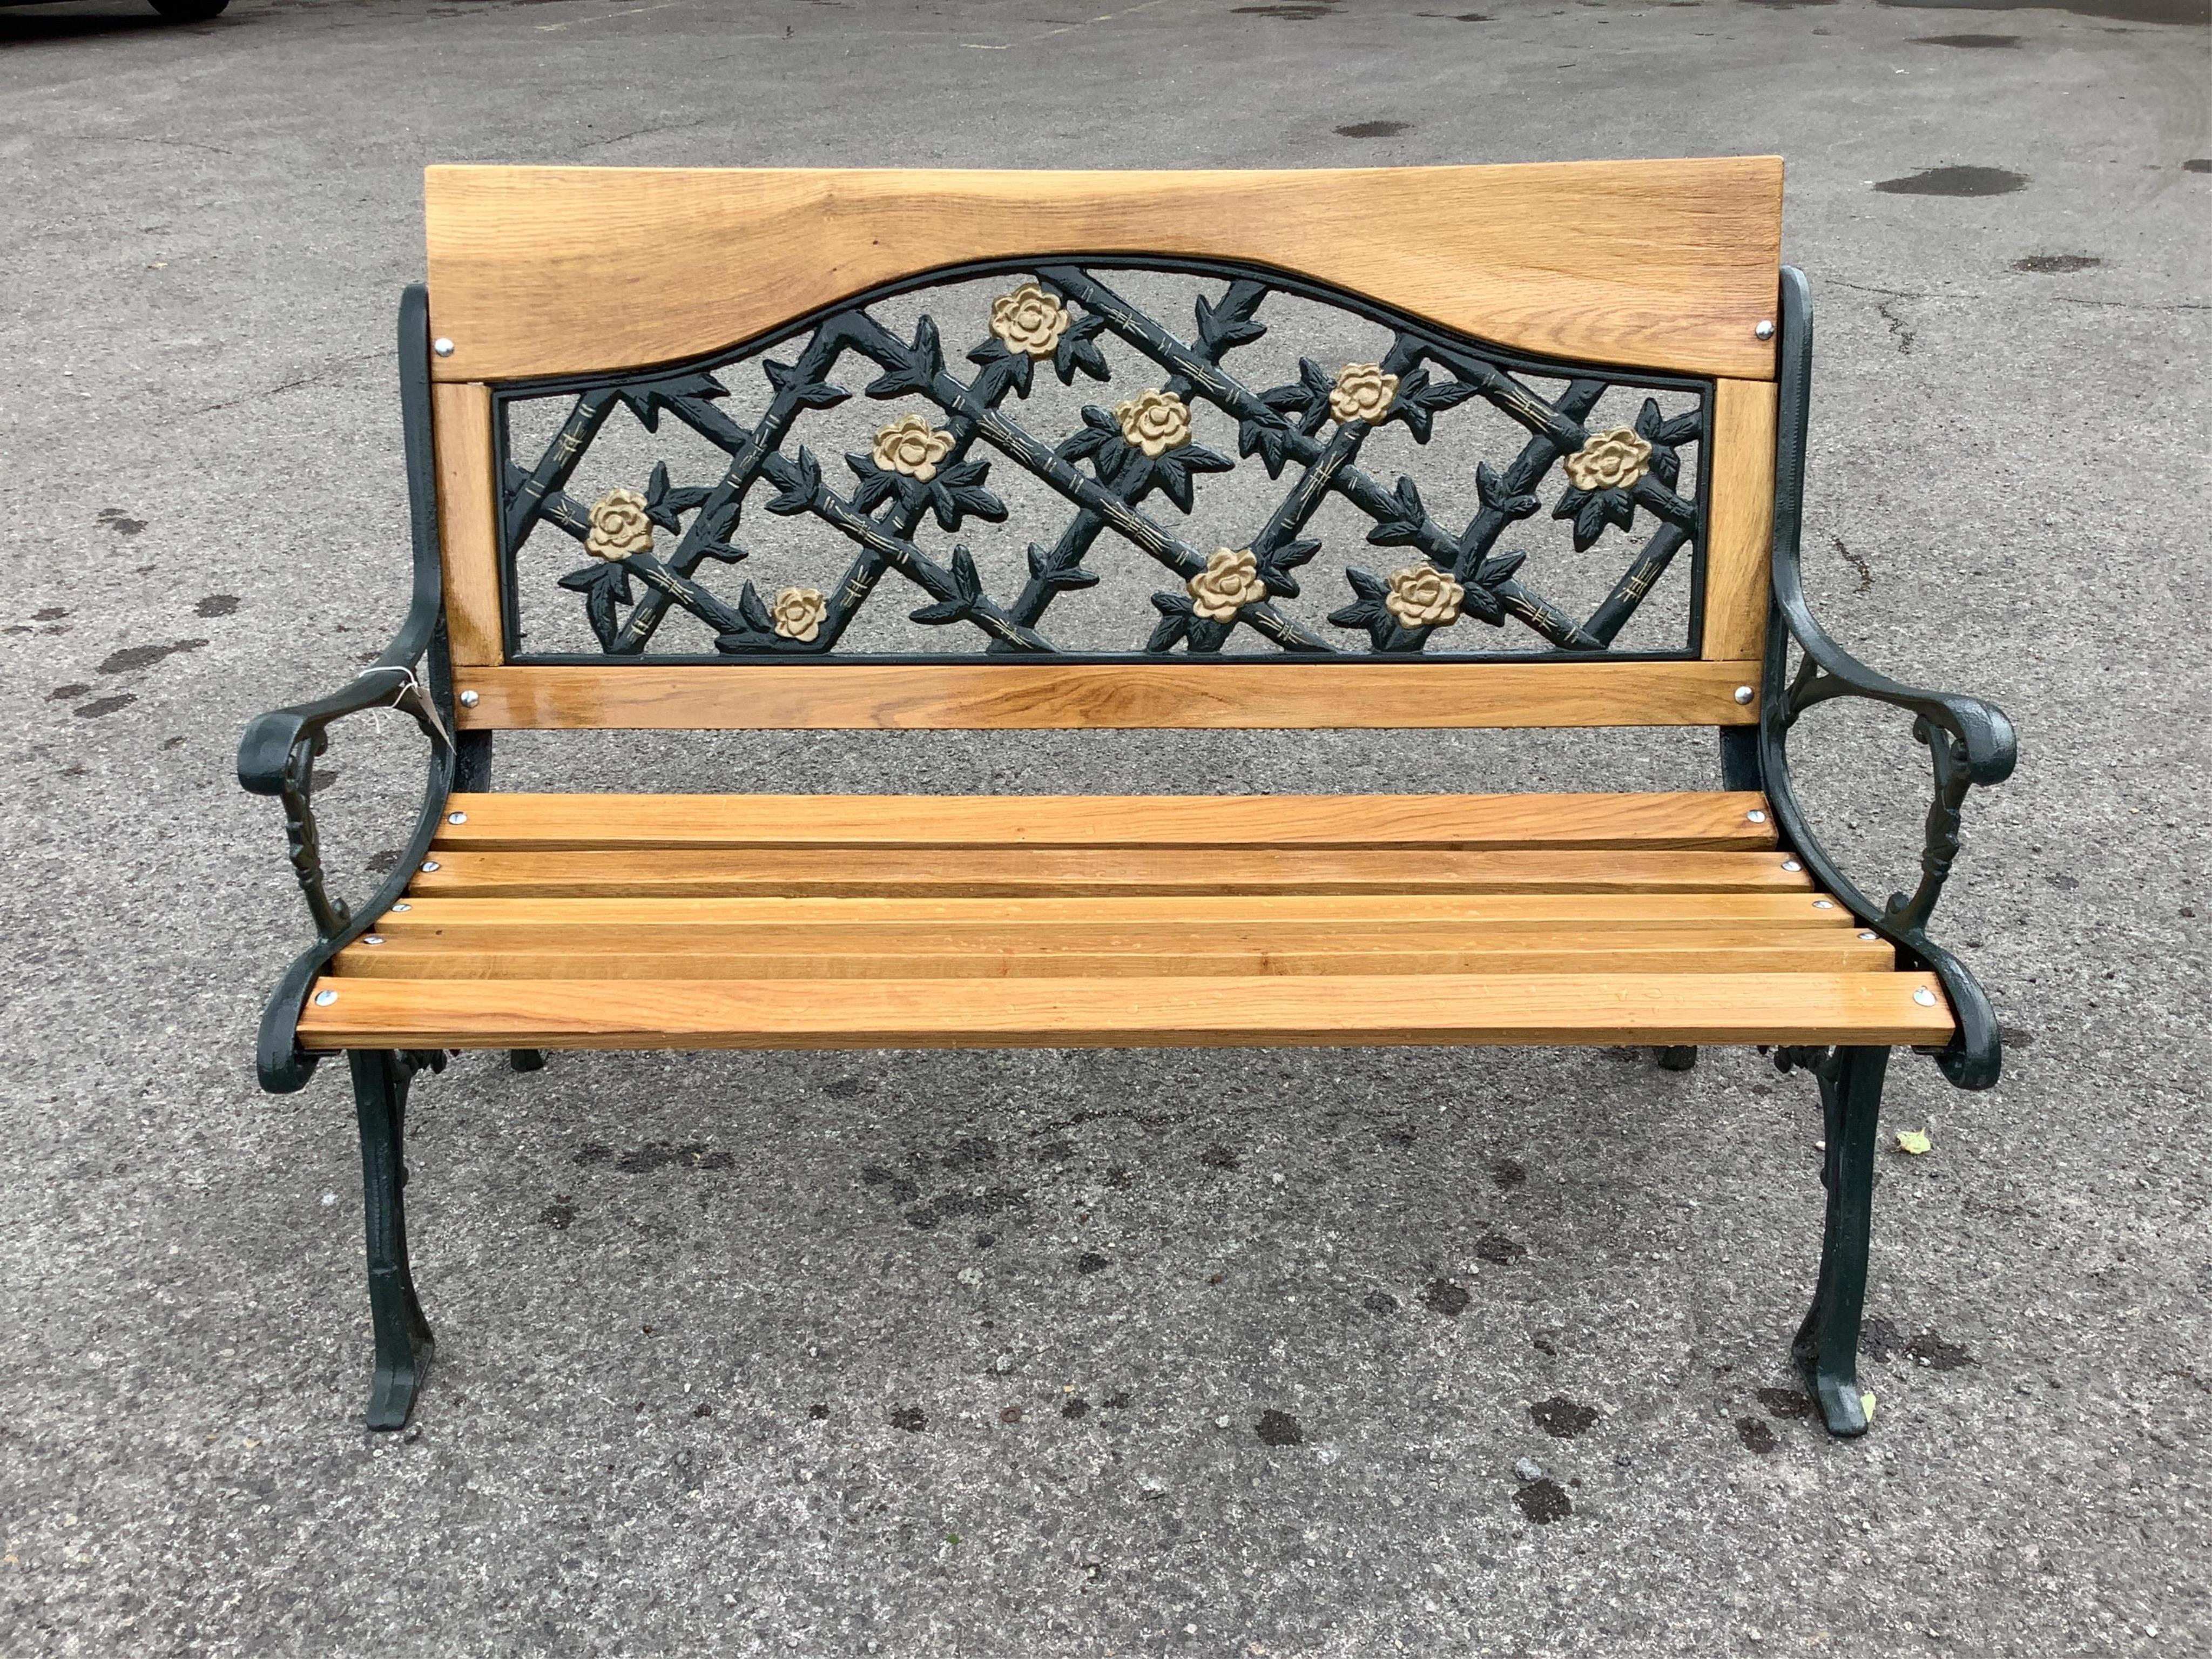 A Victorian style cast metal and slatted wood garden bench, width 130cm, height 90cm